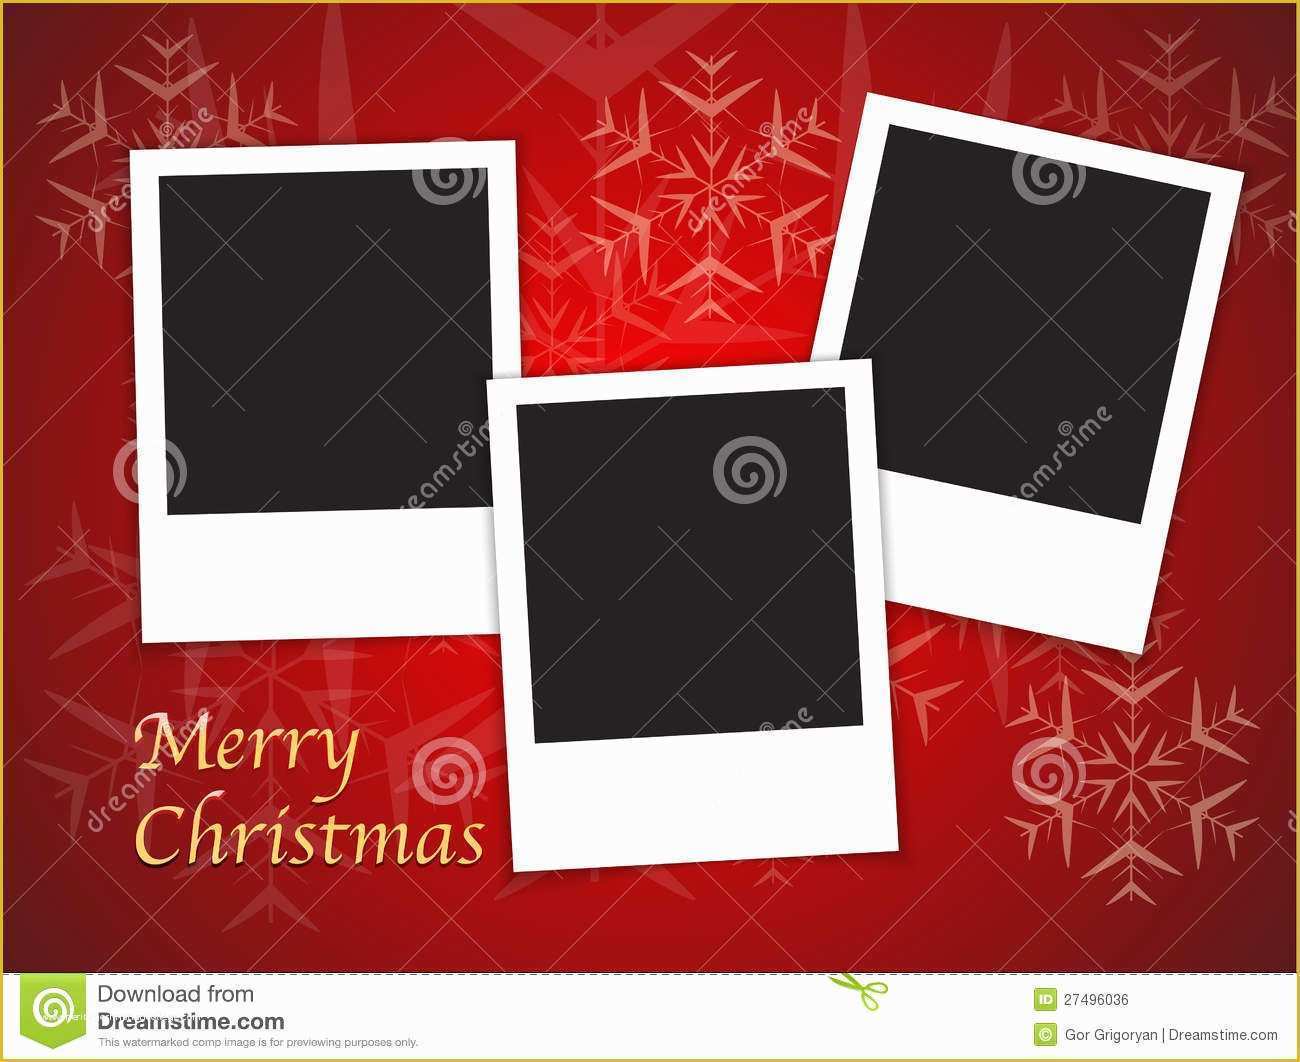 Free Christmas Photo Templates Of Christmas Card Templates with Blank Frames Stock